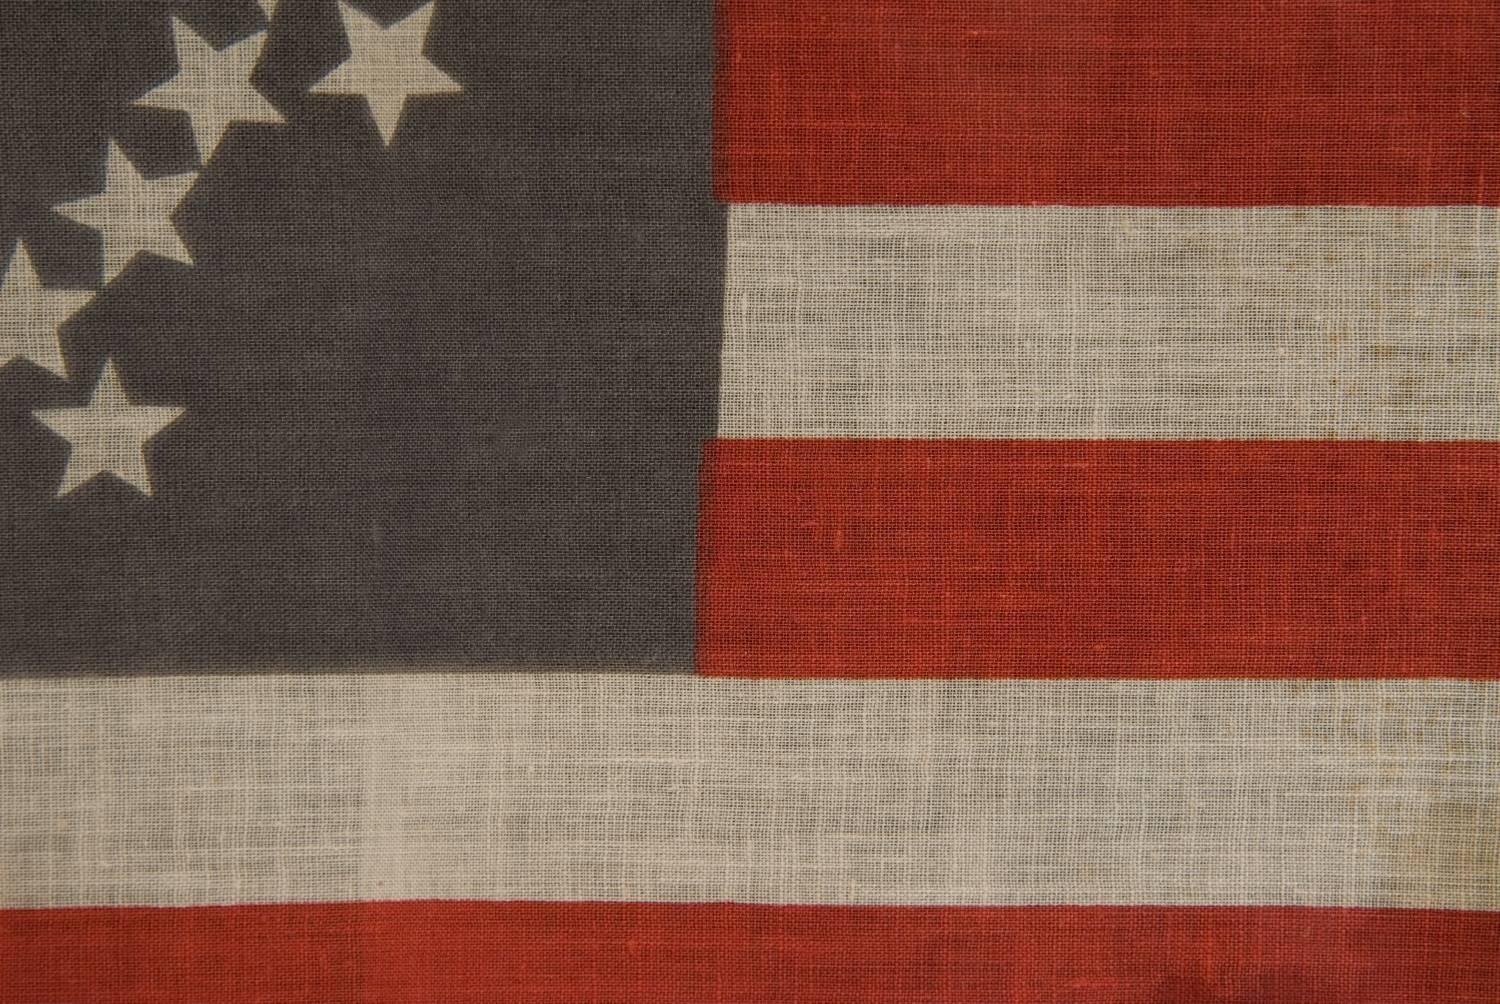 Early 20th Century 48 Stars on an Antique American Flag Designed and Commissioned by Wayne Whipple